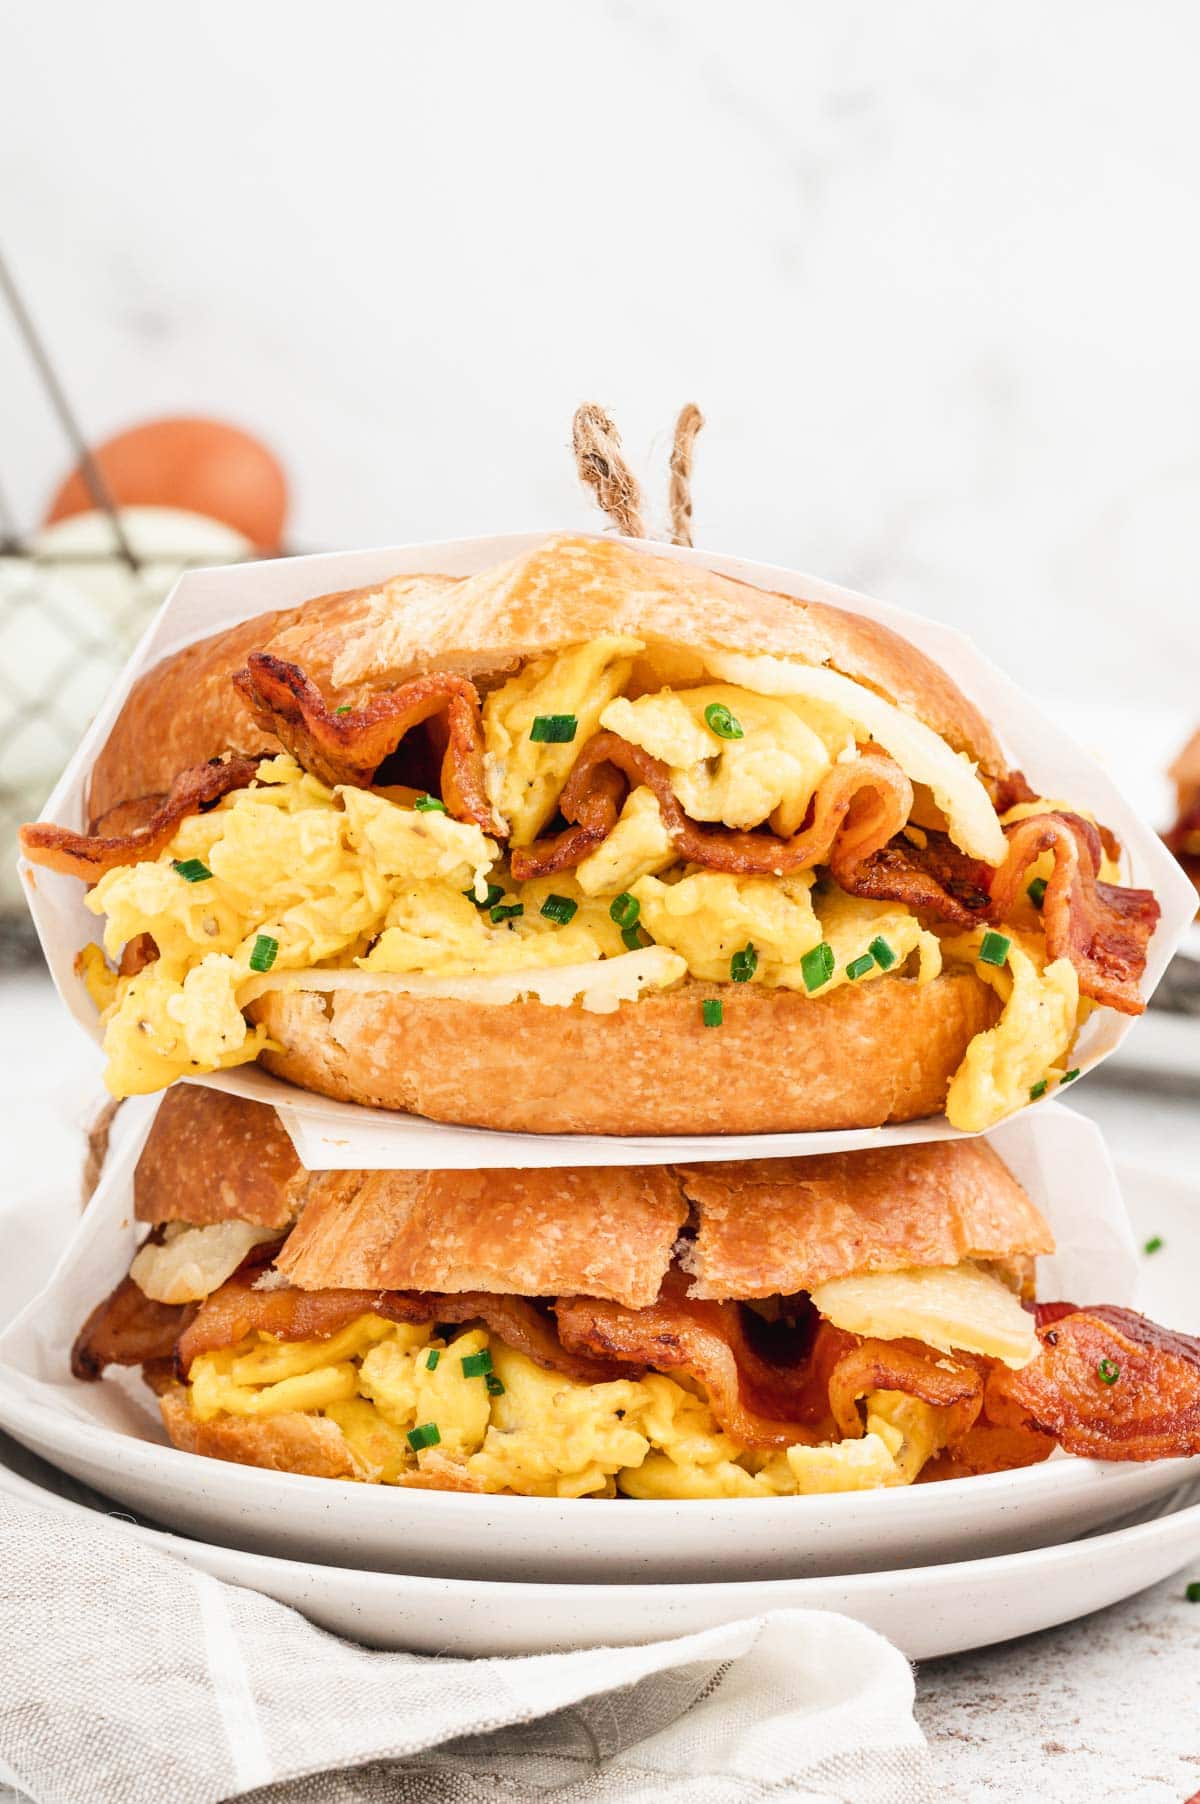 Two stacked croissants with scrambled eggs, bacon and chives.